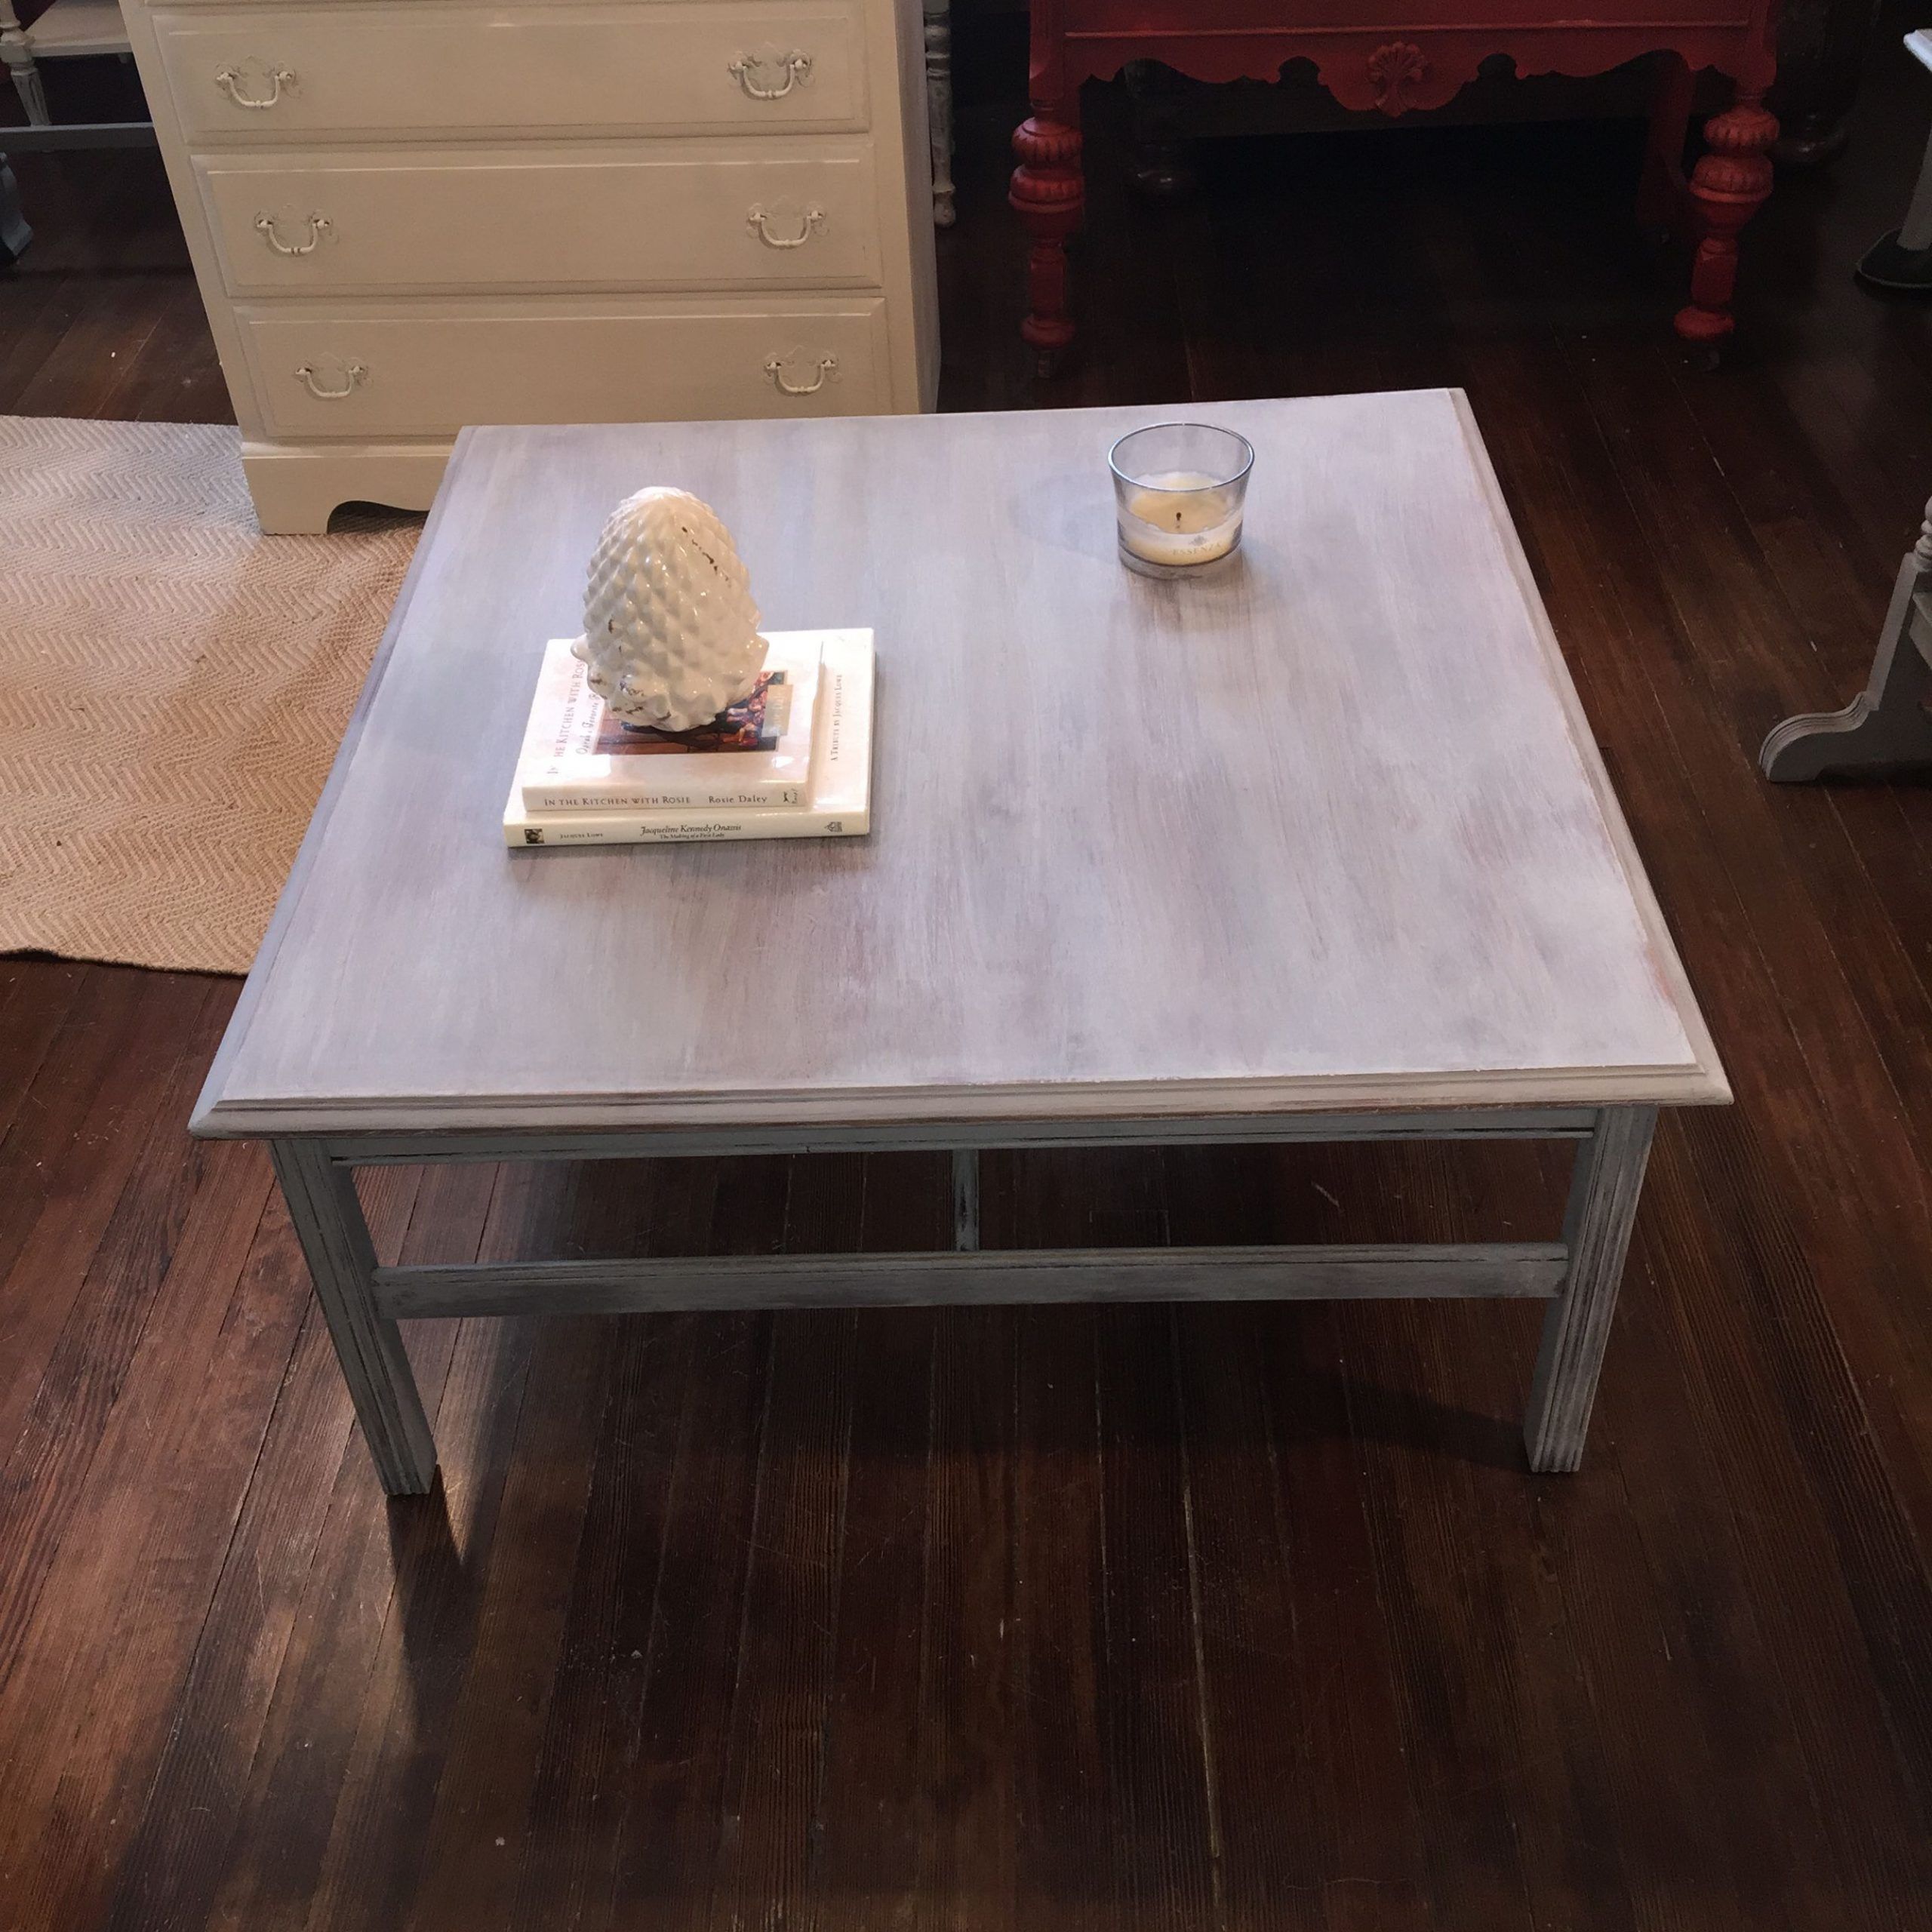 Square Coffee Table In Paris Grey | Coffee Table, Coffee With Regard To Smoke Gray Wood Square Coffee Tables (View 1 of 15)